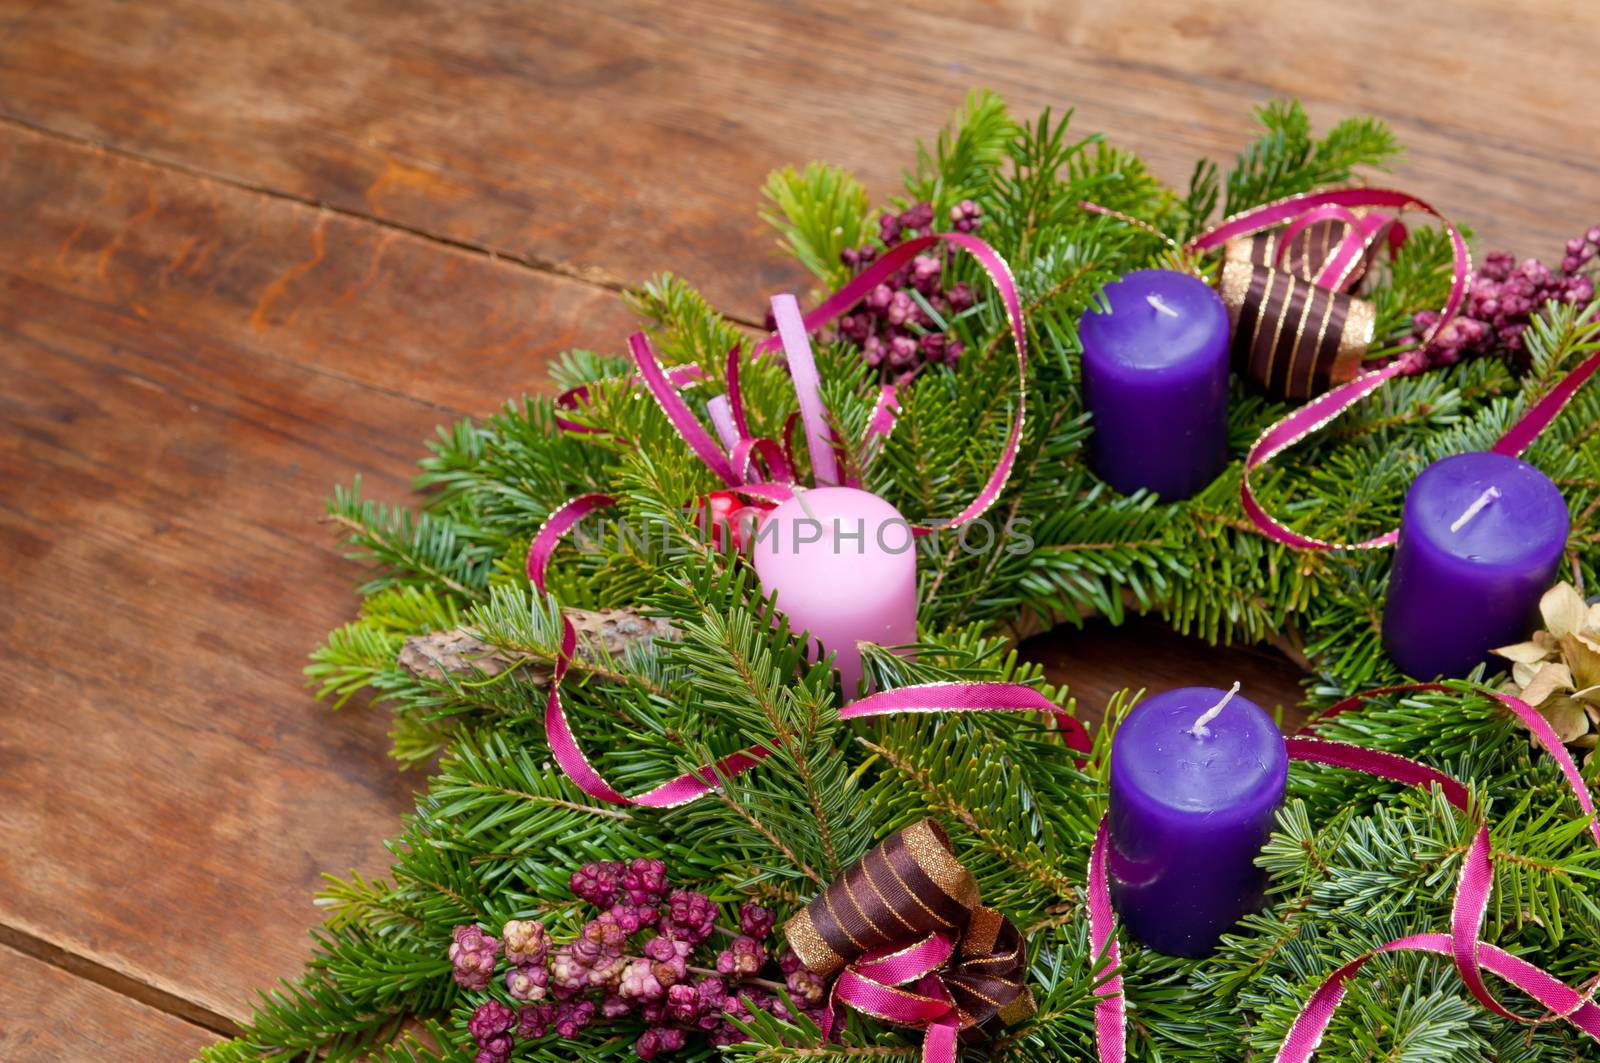 Christmas wreath advent wreath on wooden background with copy space